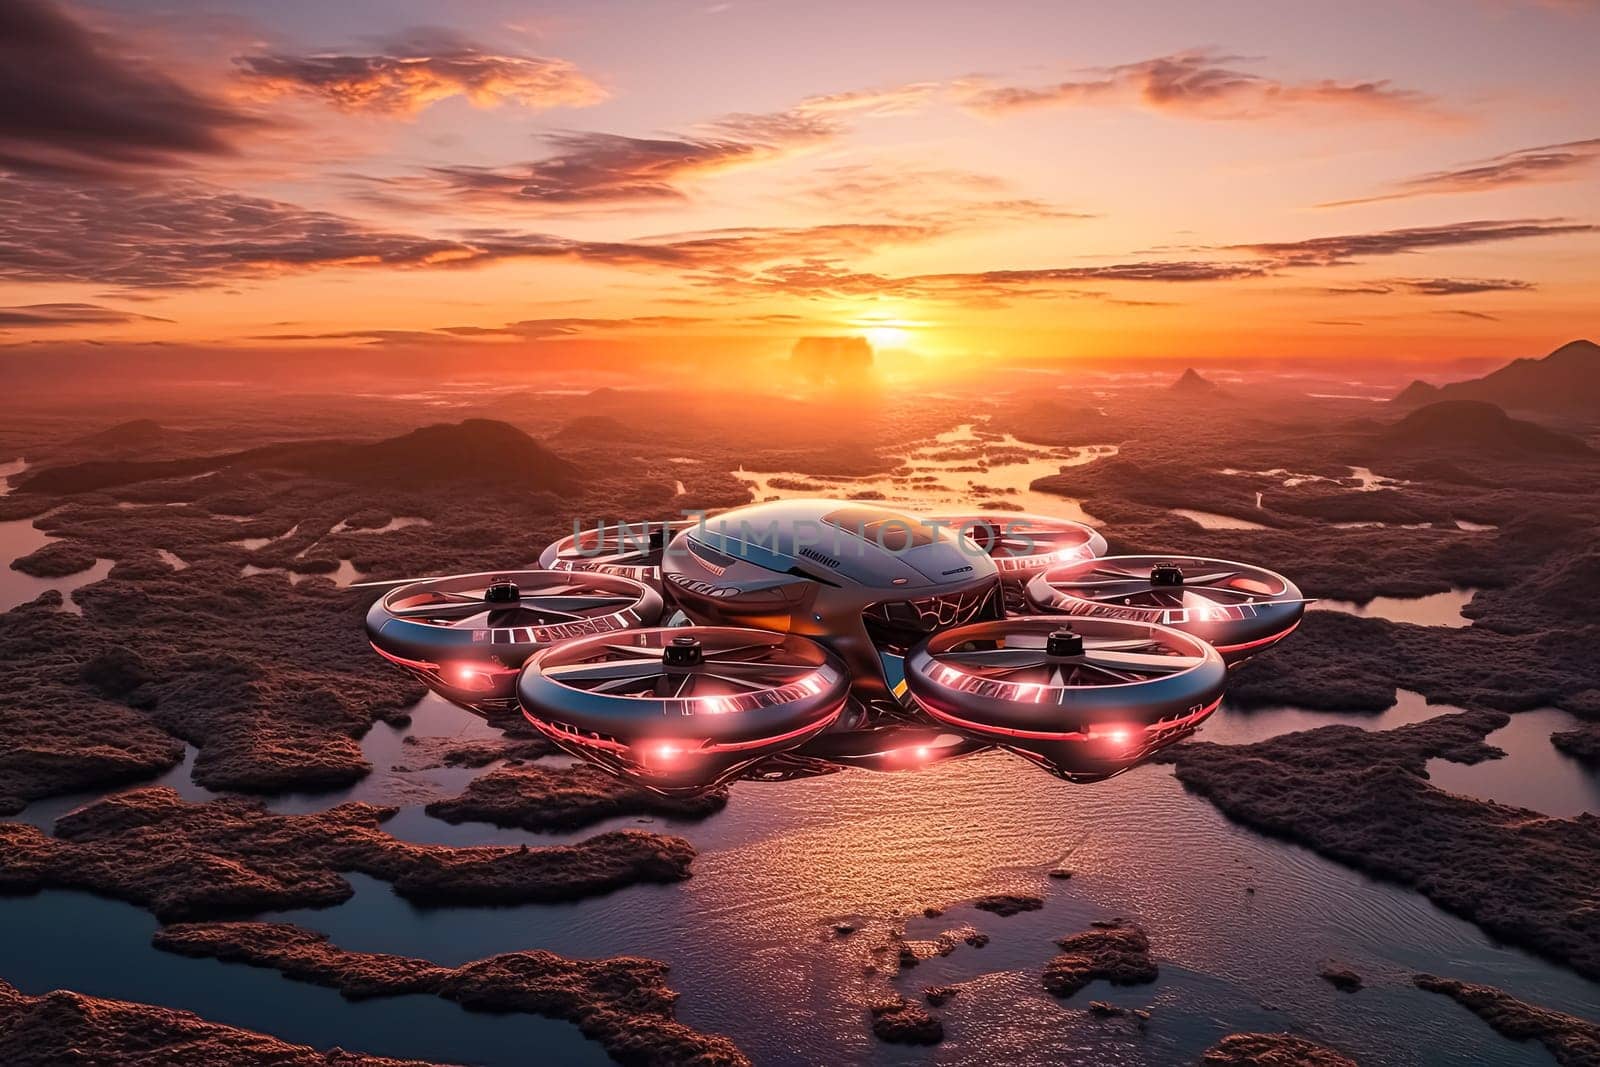 A futuristic drone is flying over a body of water with a beautiful sunset in the background. The drone is surrounded by a group of smaller drones, creating a sense of unity and teamwork